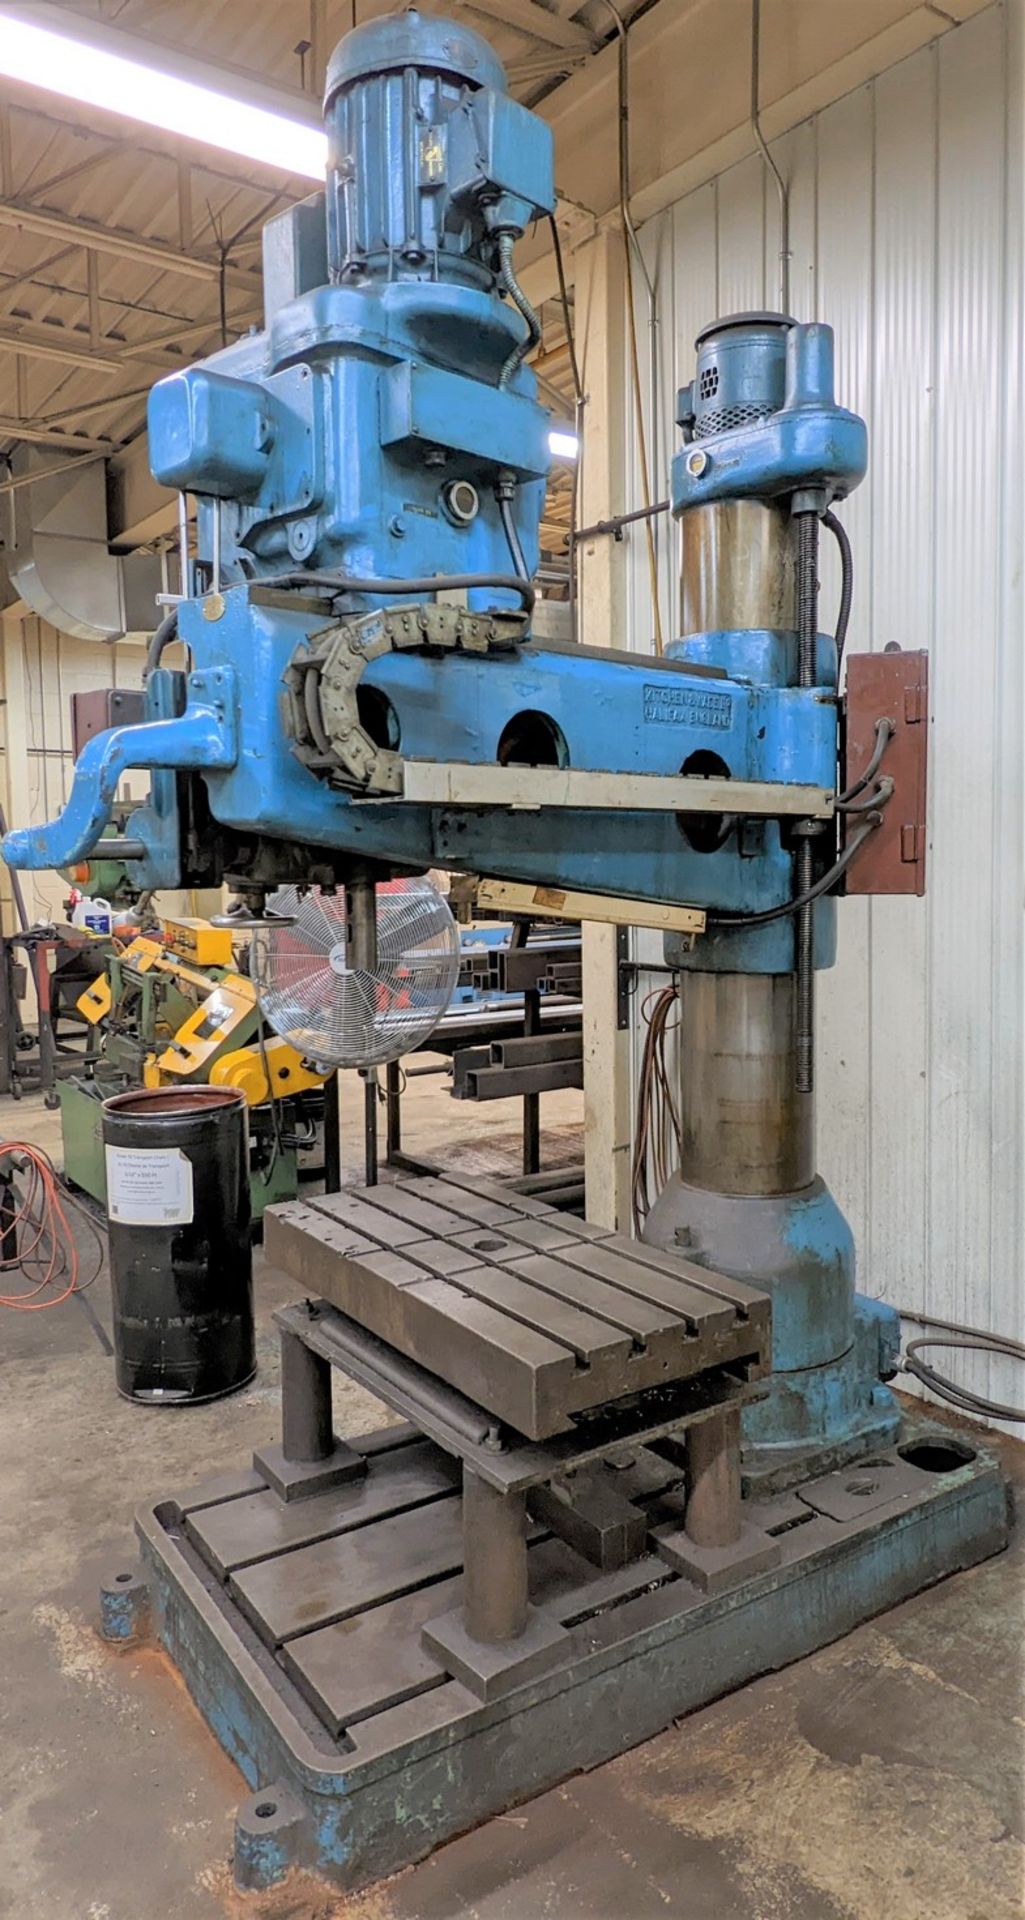 KITCHEN & WADE 36E26 RADIAL ARM DRILL, 4’ ARM, S/N 17963 W/ BOX TABLE - Image 3 of 6